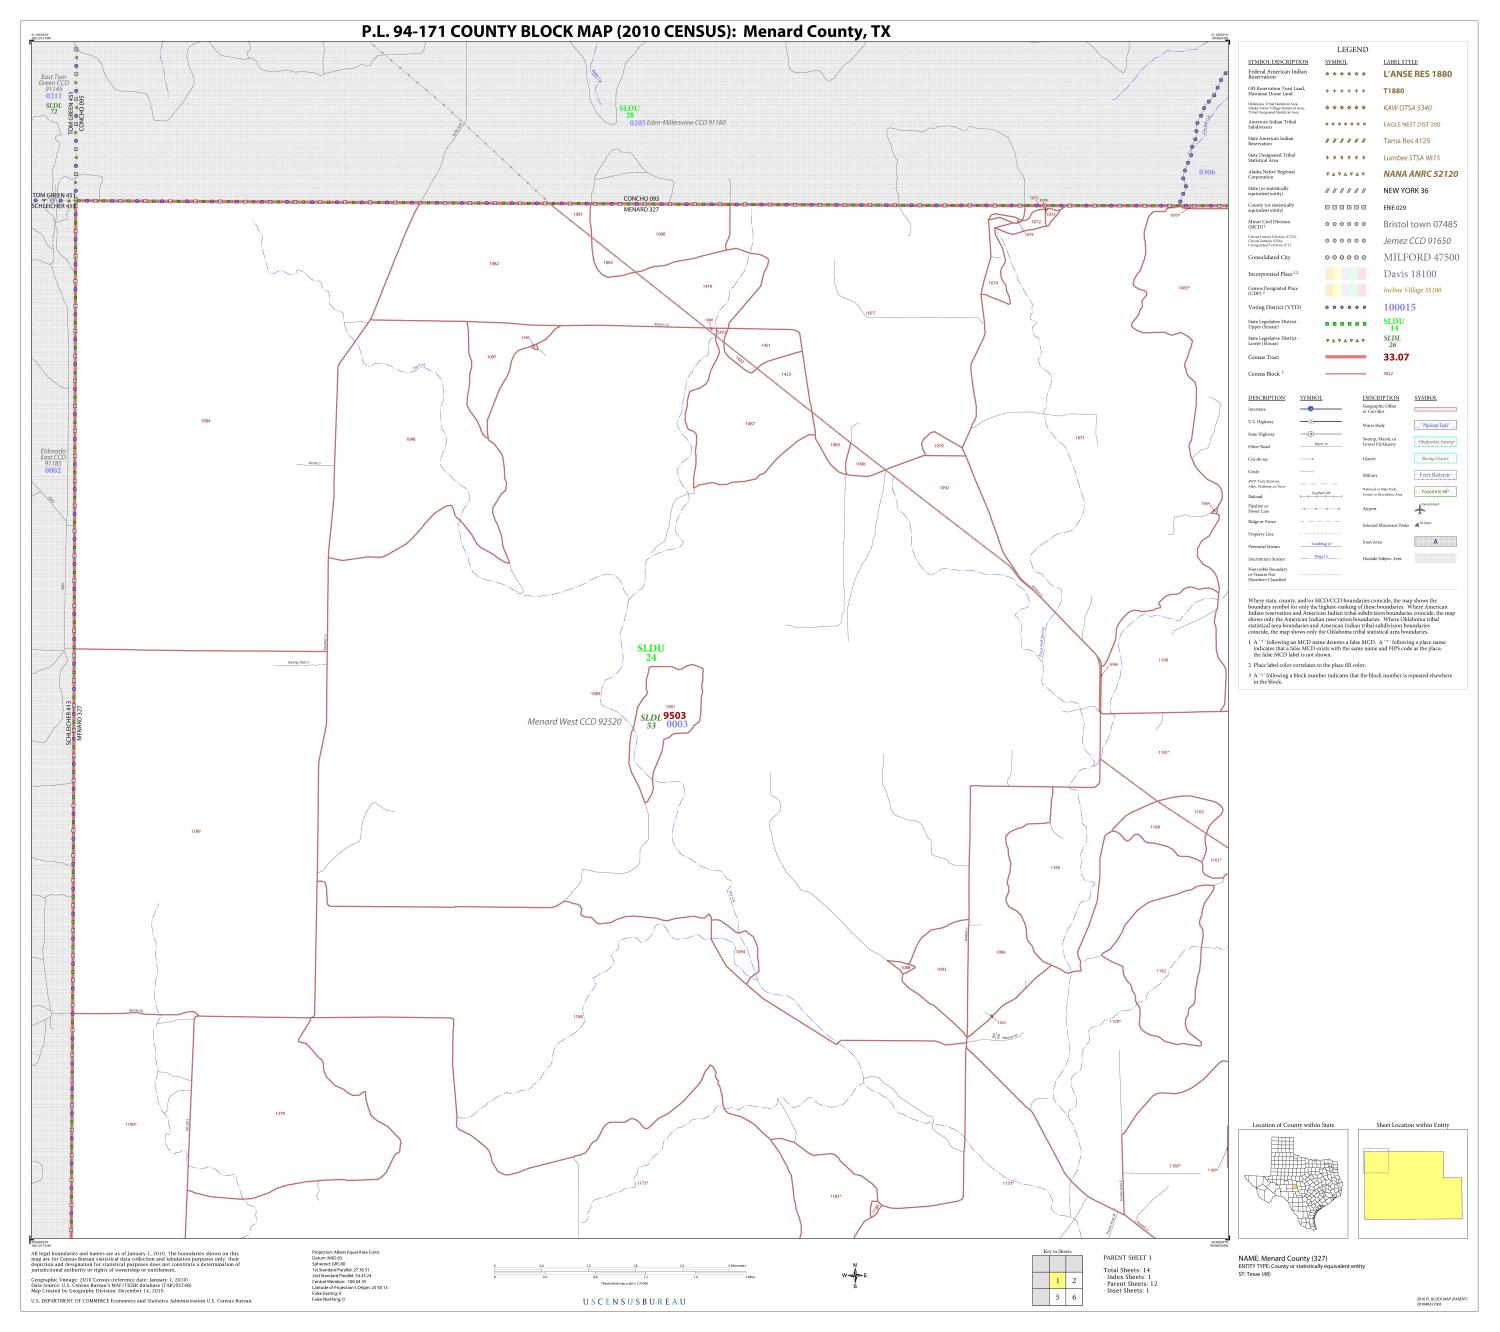 P.L. 94-171 County Block Map (2010 Census): Menard County, Block 1
                                                
                                                    [Sequence #]: 1 of 1
                                                